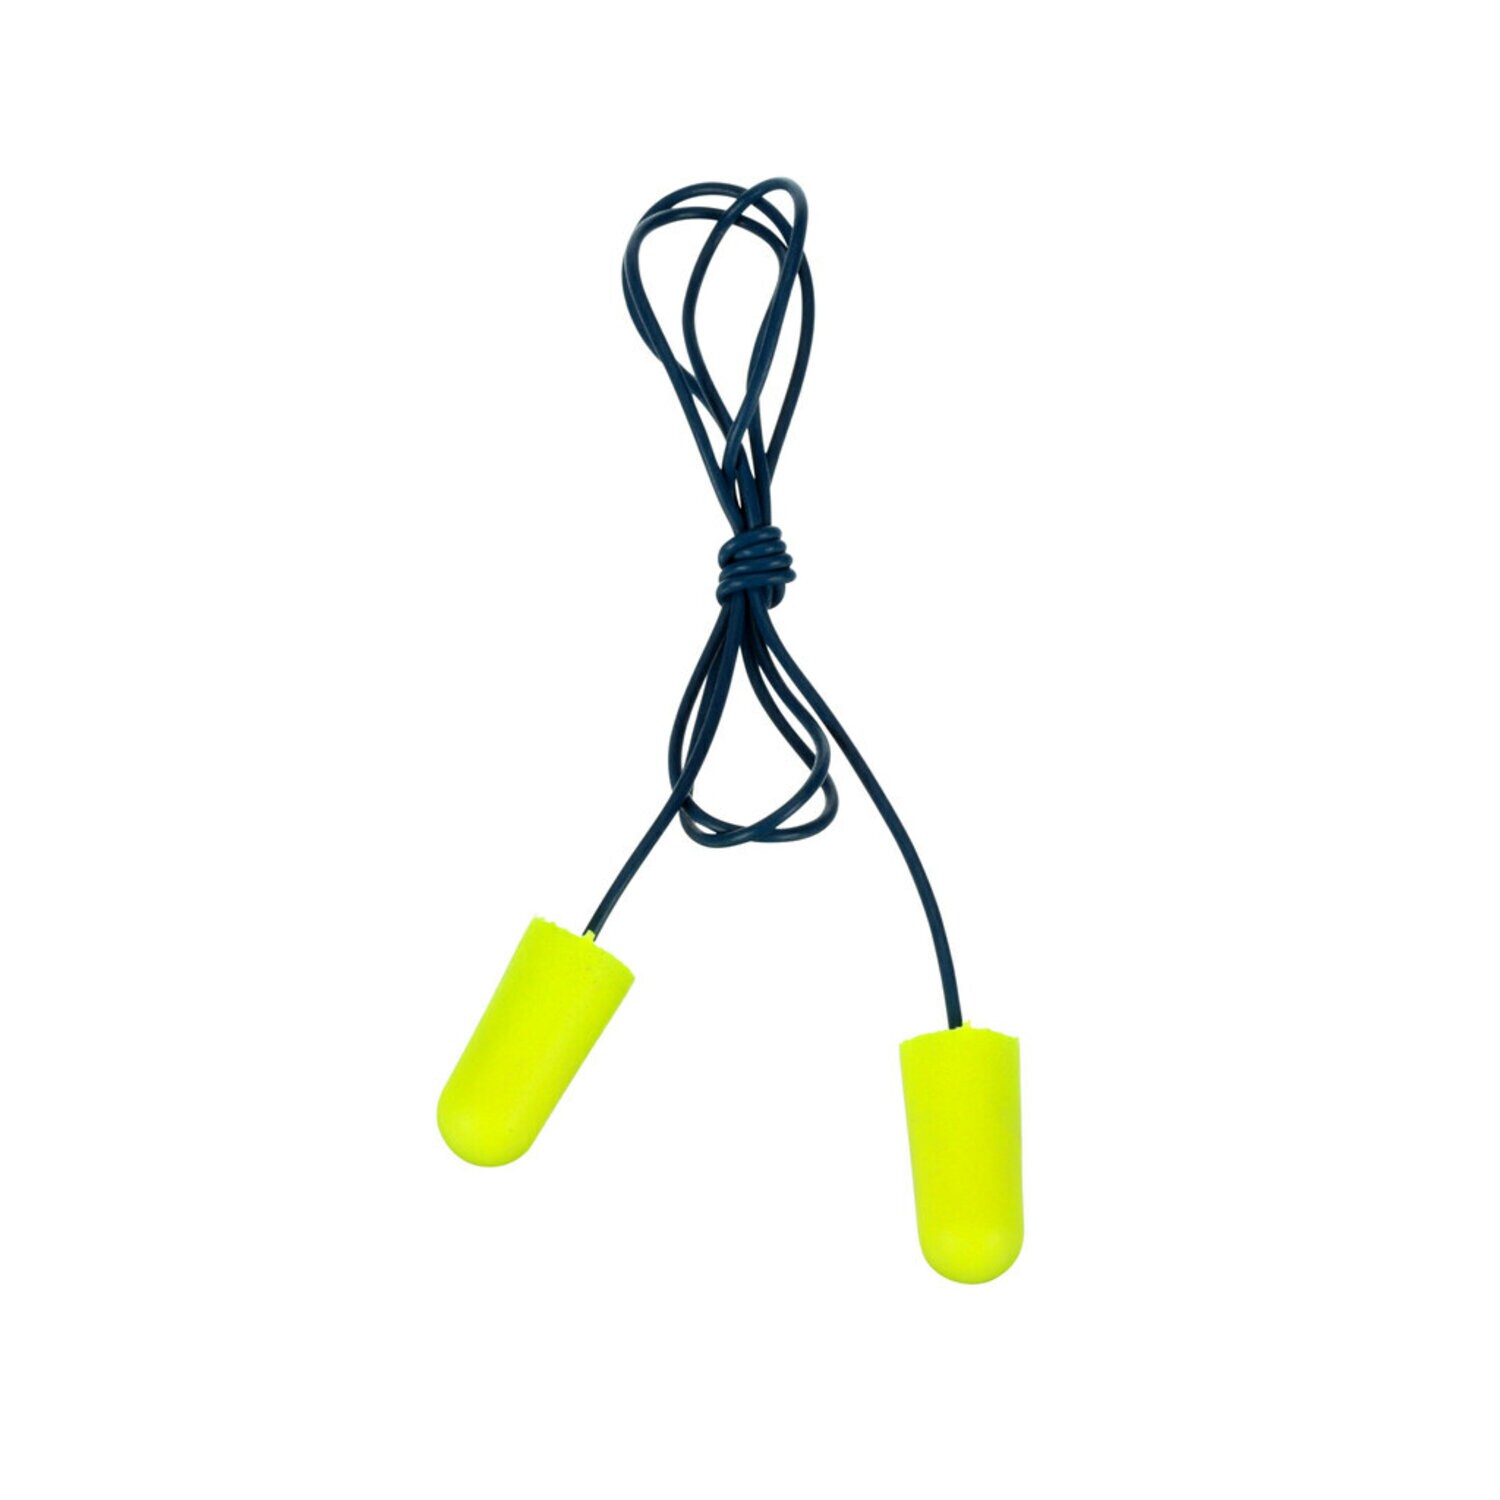 7000029952 - 3M E-A-Rsoft Earplugs 311-4106, Metal Detectable, Corded, Poly Bag,
Regular Size, 2000 Pair/Case